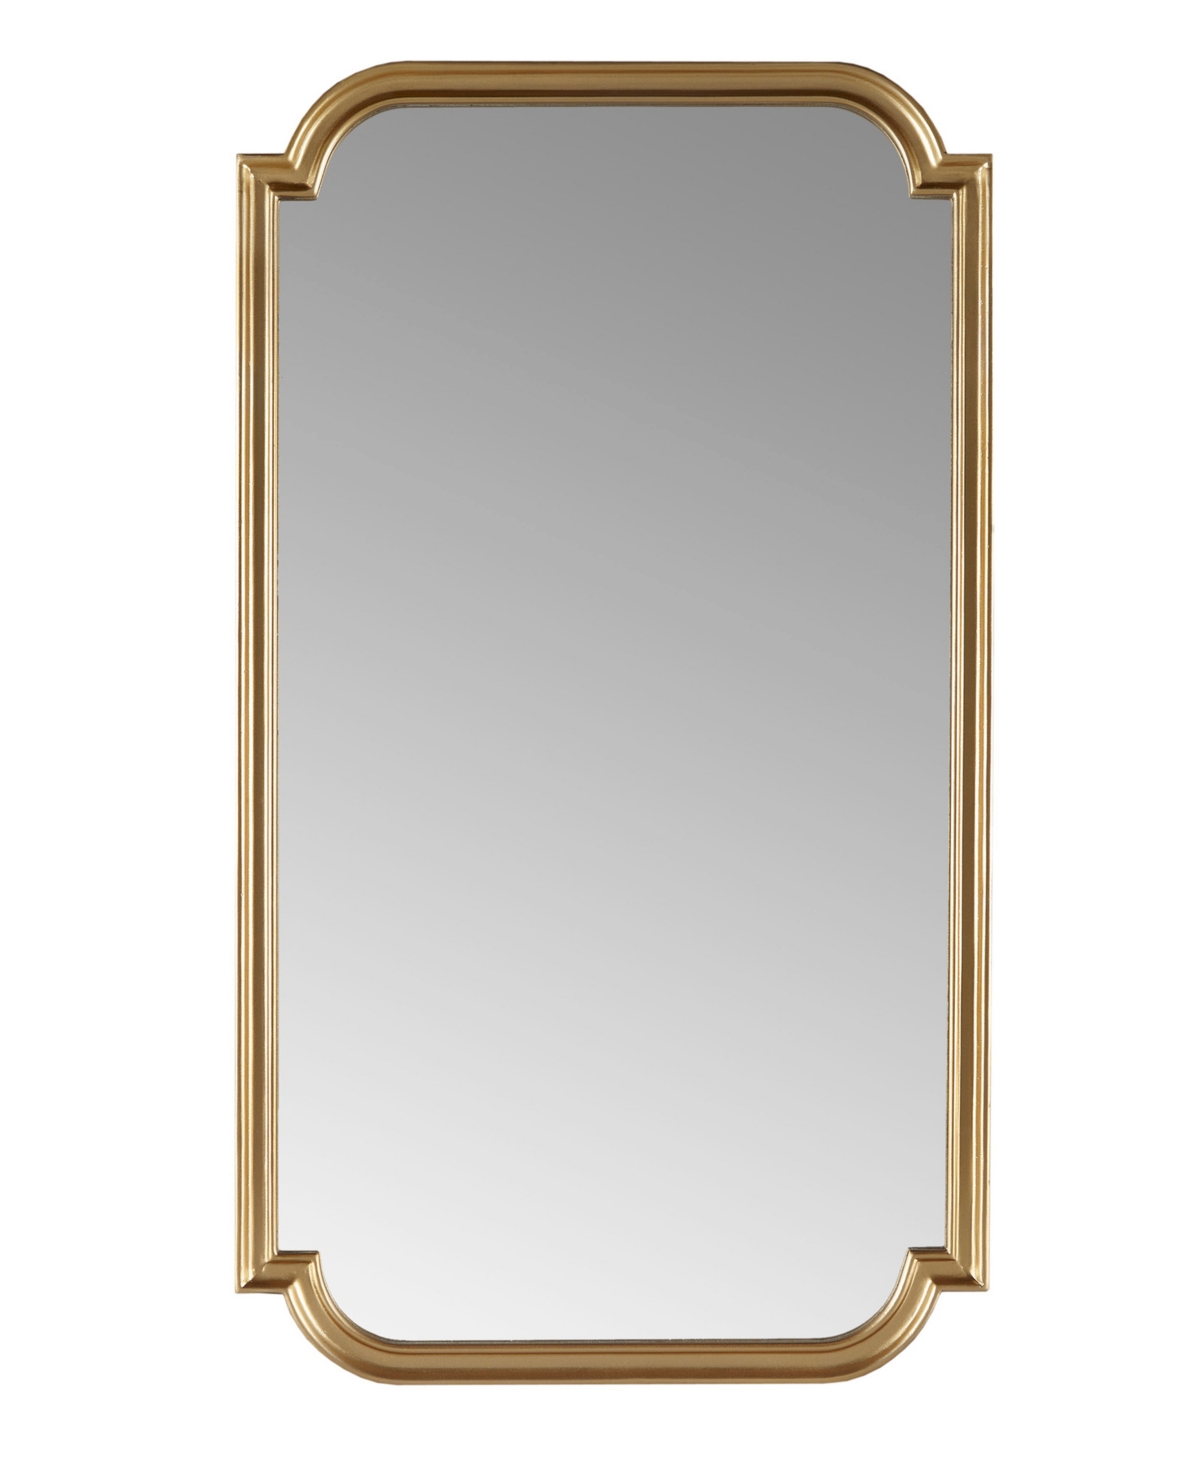 Adelaide Gold-Tone Scalloped Wood Wall Mirror - Gold